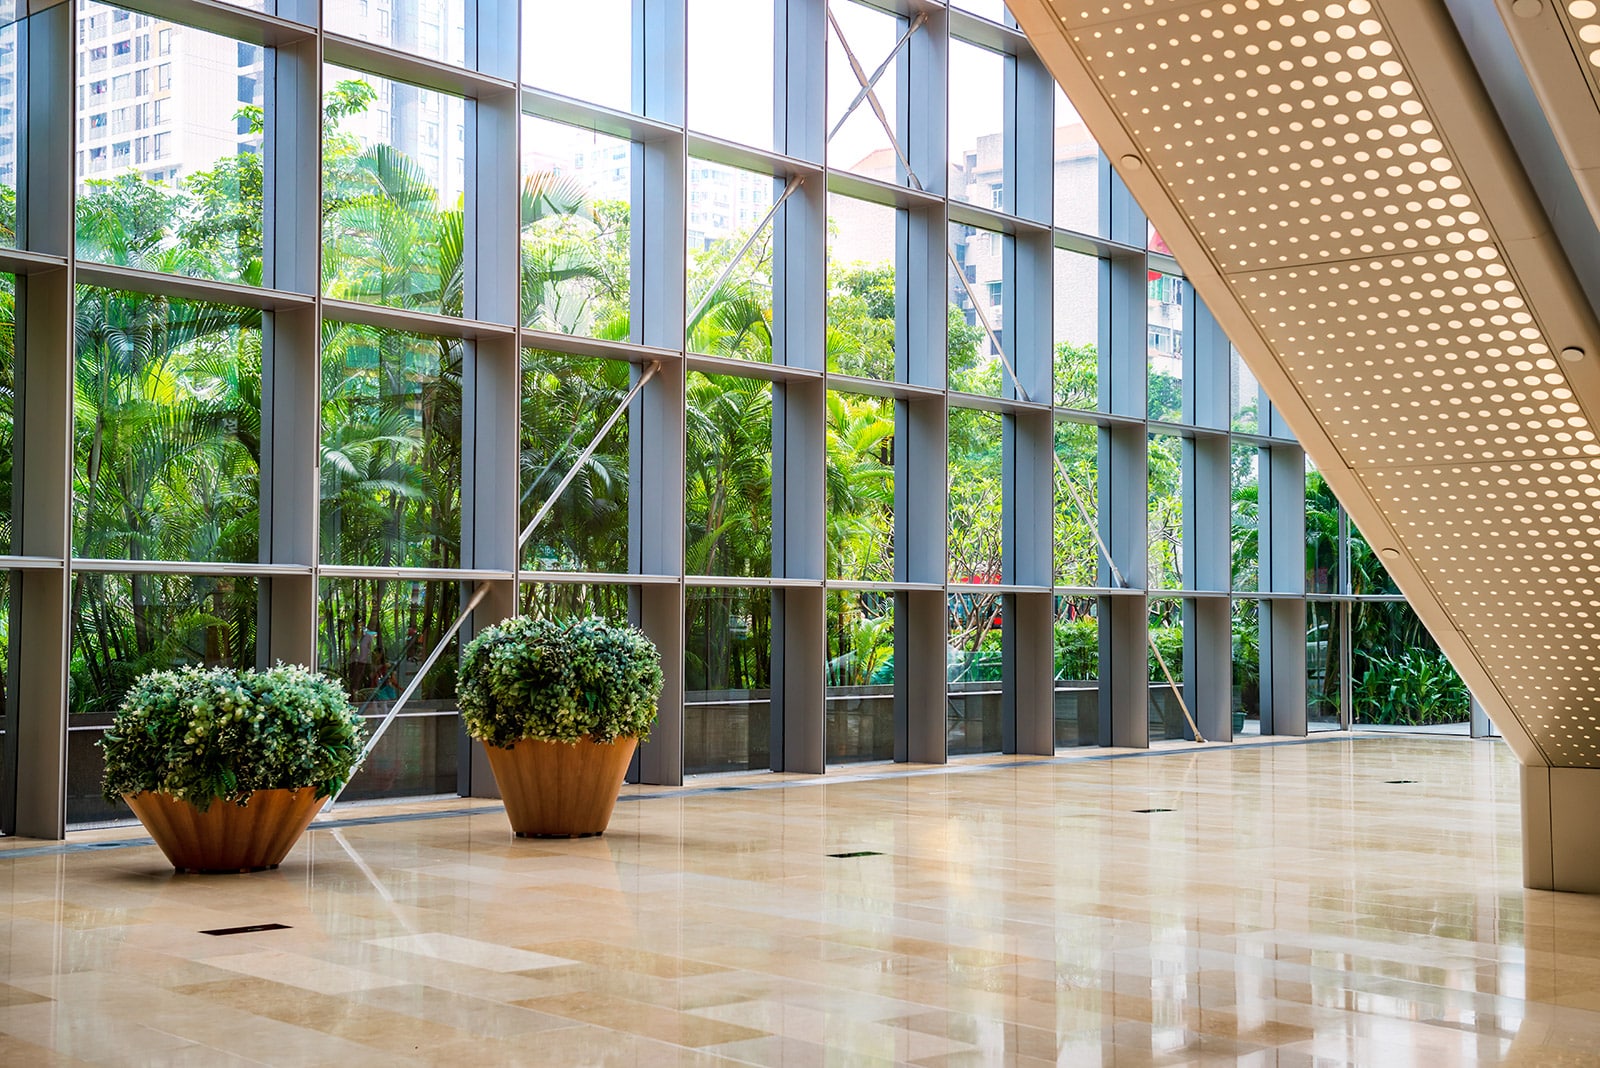 The inside of an office building with plants surrounding it